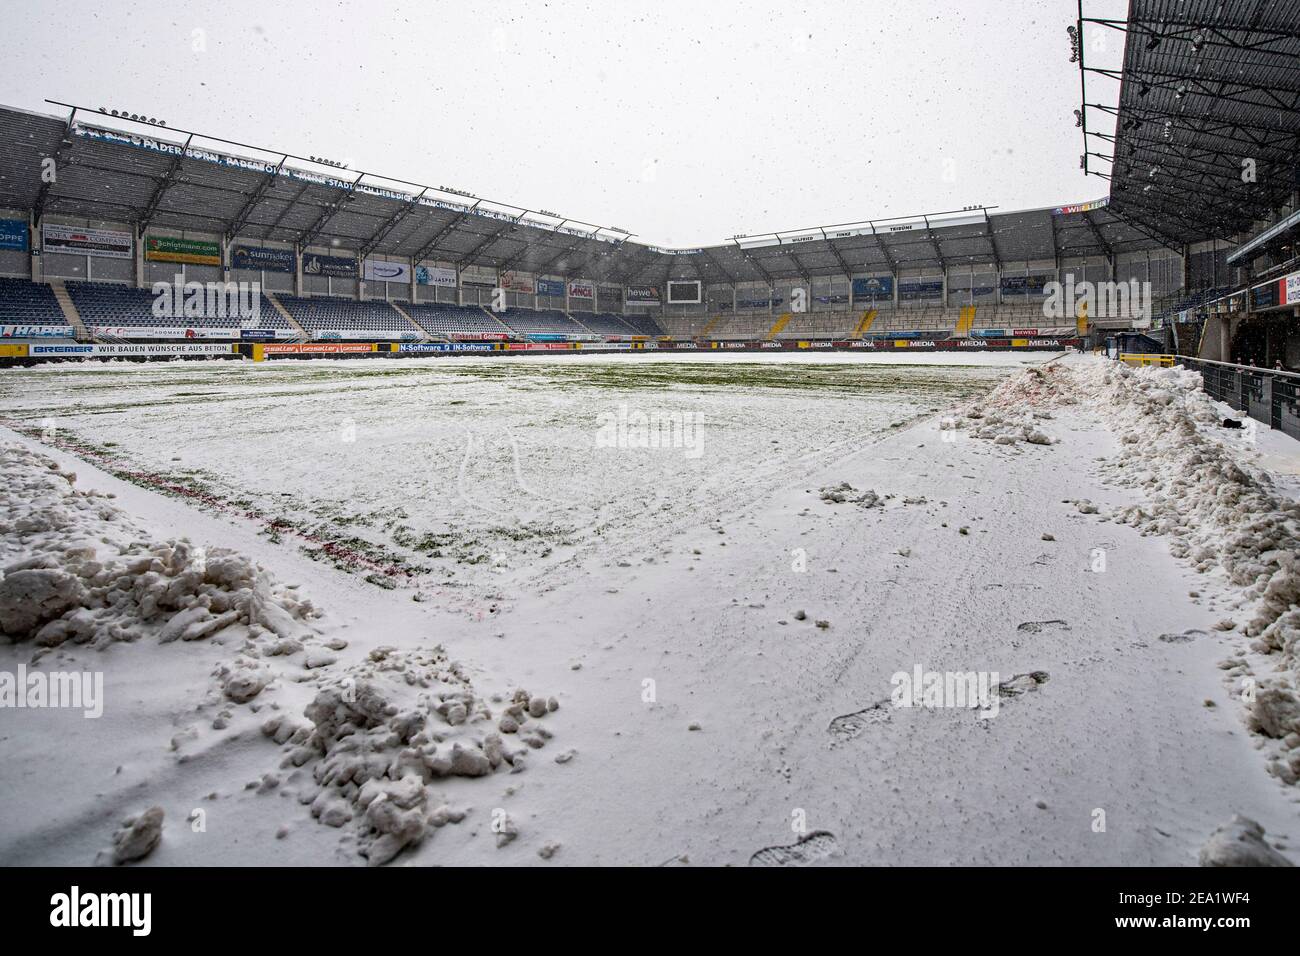 07 February 2021, North Rhine-Westphalia, Paderborn: Football: 2. Bundesliga, SC Paderborn 07 - 1. FC Heidenheim, Matchday 20, at Benteler-Arena. View into the empty stadium with snow-covered turf. Helpers had been clearing the pitch of snow since early morning. Due to the heavy snowfall, the match was nevertheless cancelled shortly before kick-off. Photo: David Inderlied/dpa - IMPORTANT NOTE: In accordance with the regulations of the DFL Deutsche Fußball Liga and/or the DFB Deutscher Fußball-Bund, it is prohibited to use or have used photographs taken in the stadium and/or of the match in the Stock Photo